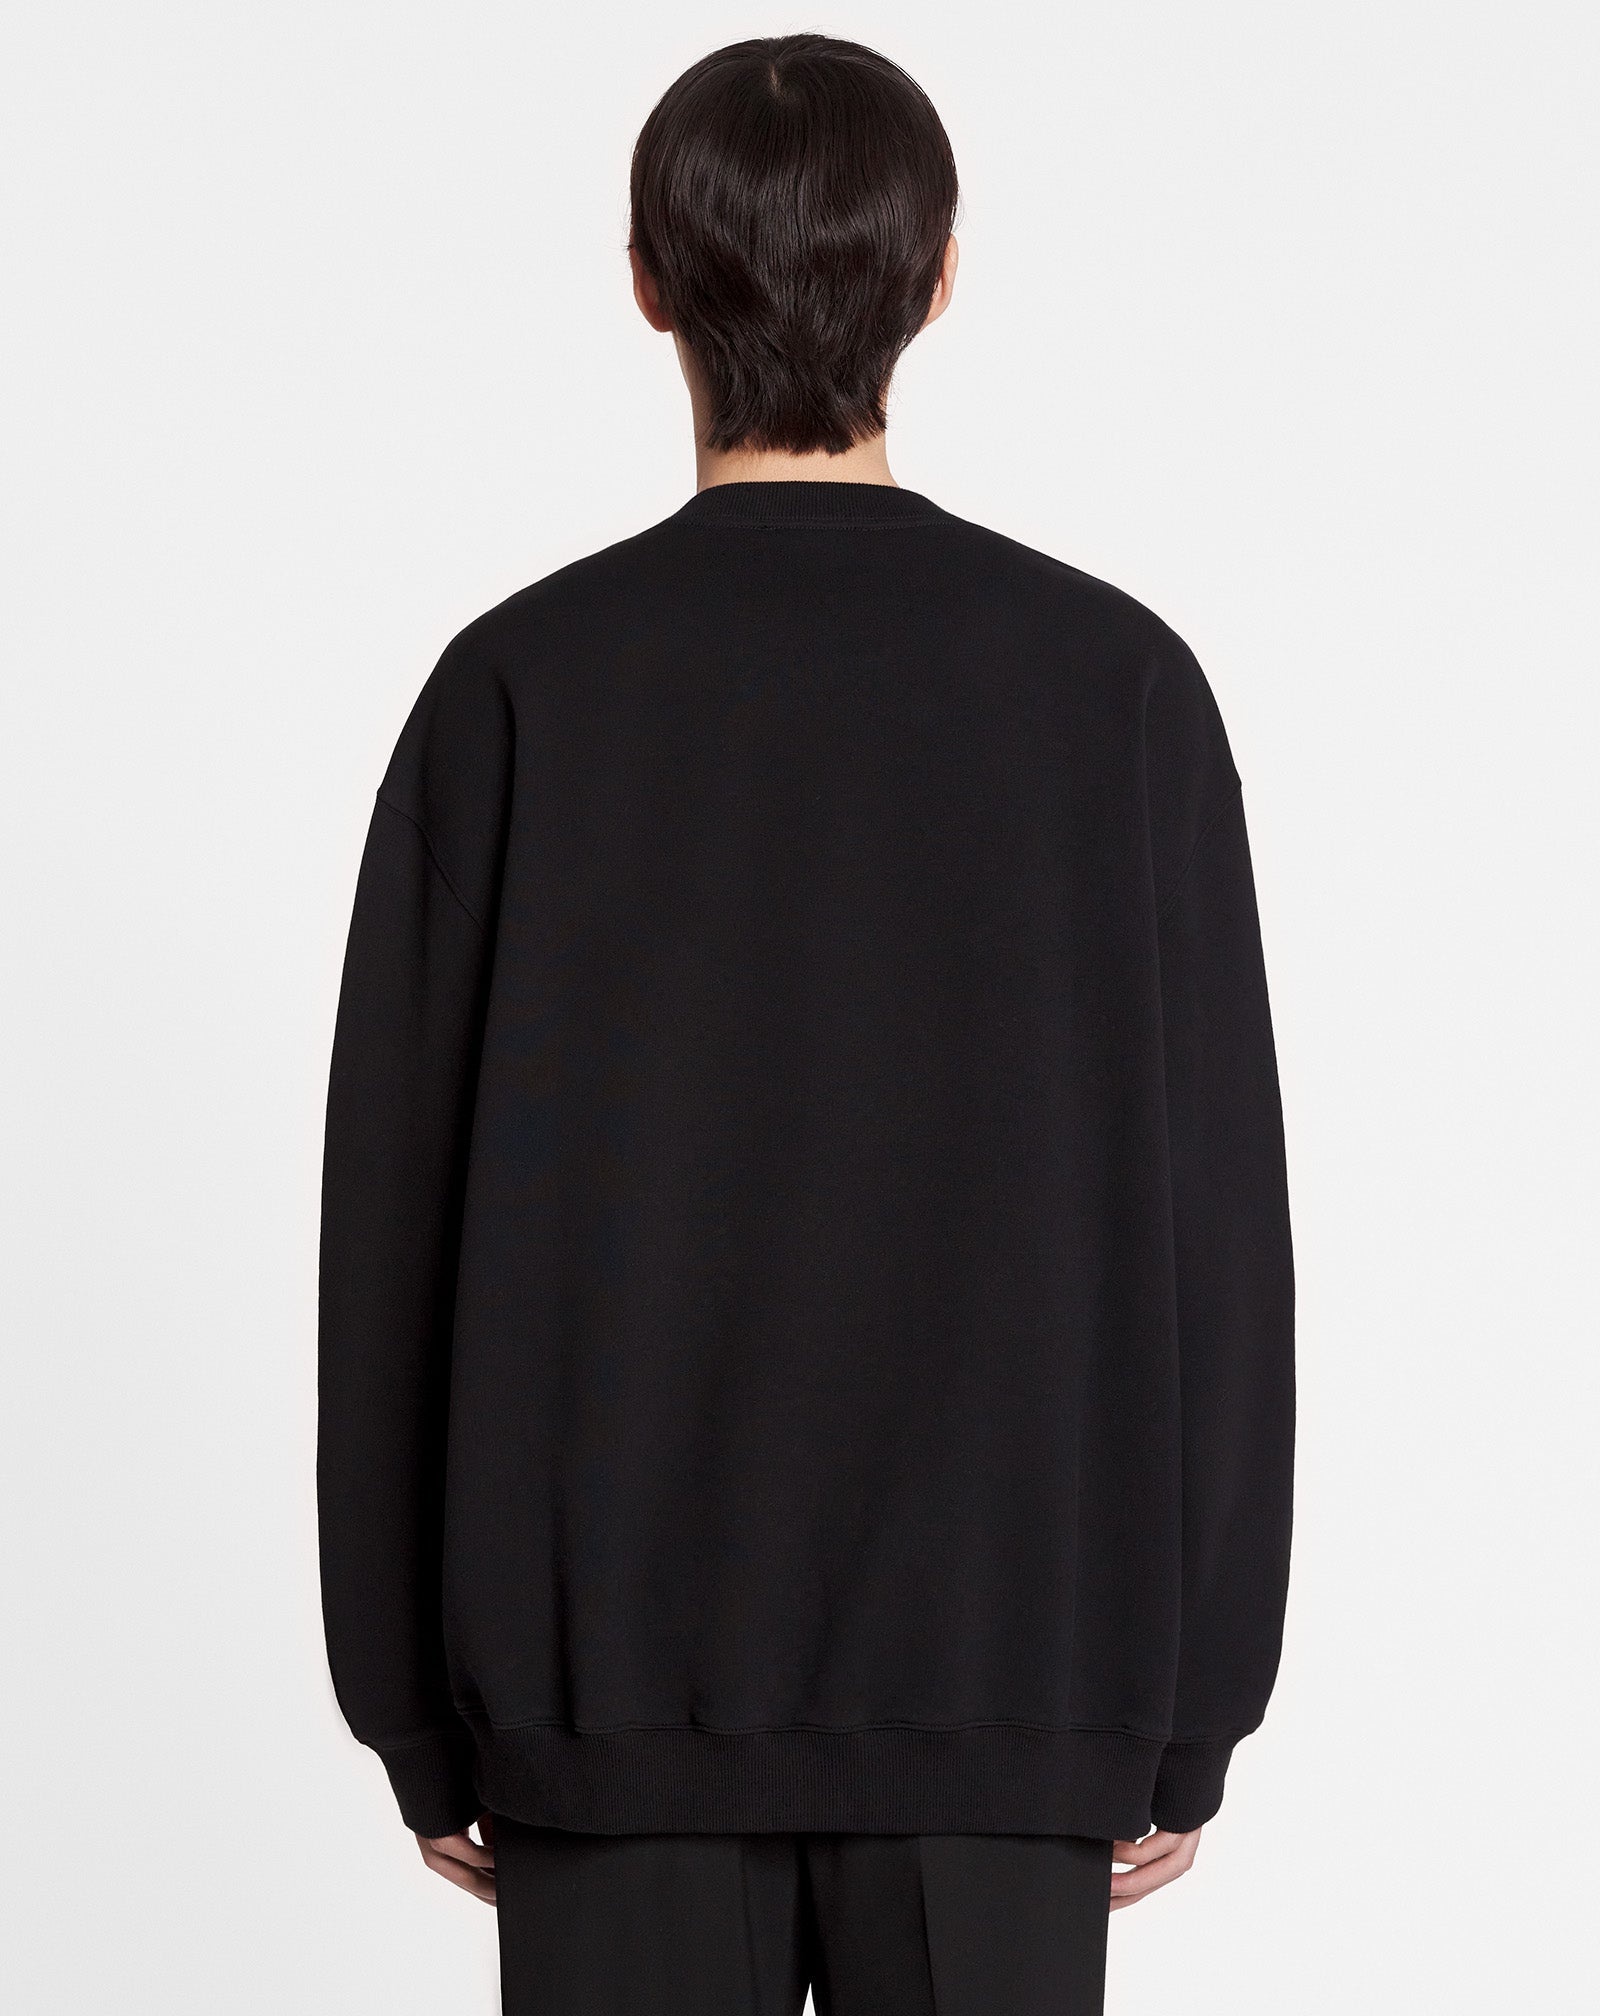 OVERSIZED EMBROIDERED LANVIN CURB SWEATSHIRT - 4